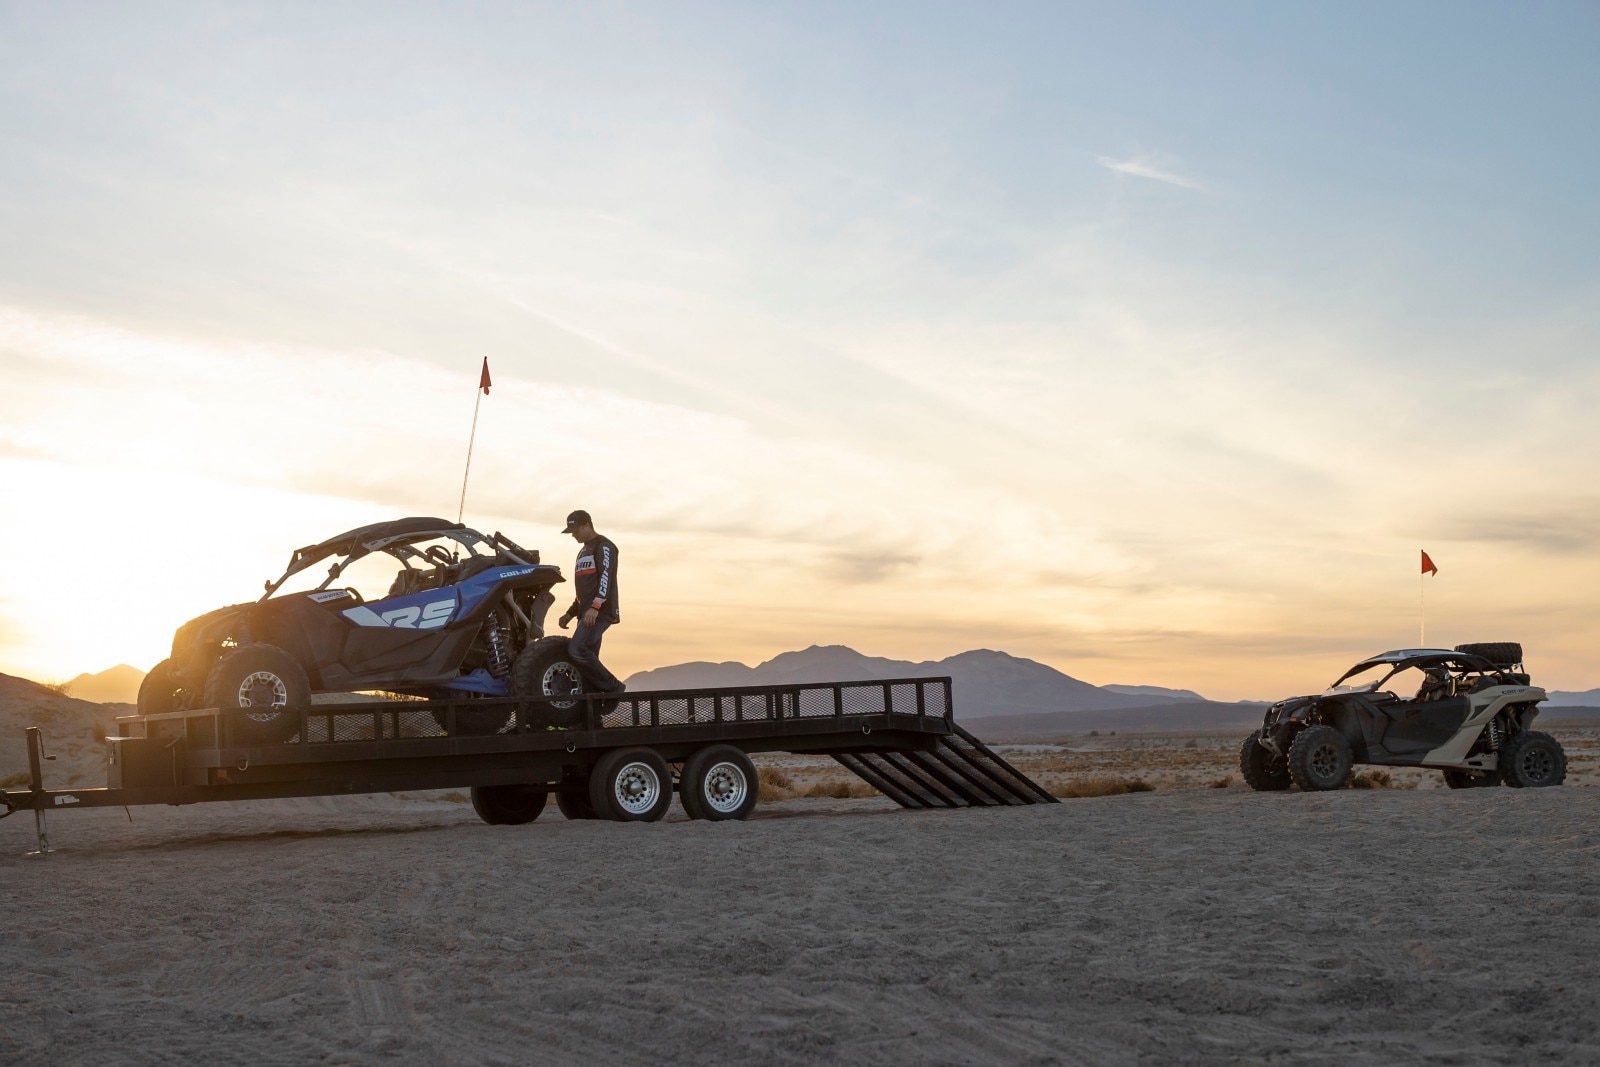 Two Can-Am riders loading their Maverick X3s on the trailer after a day of riding